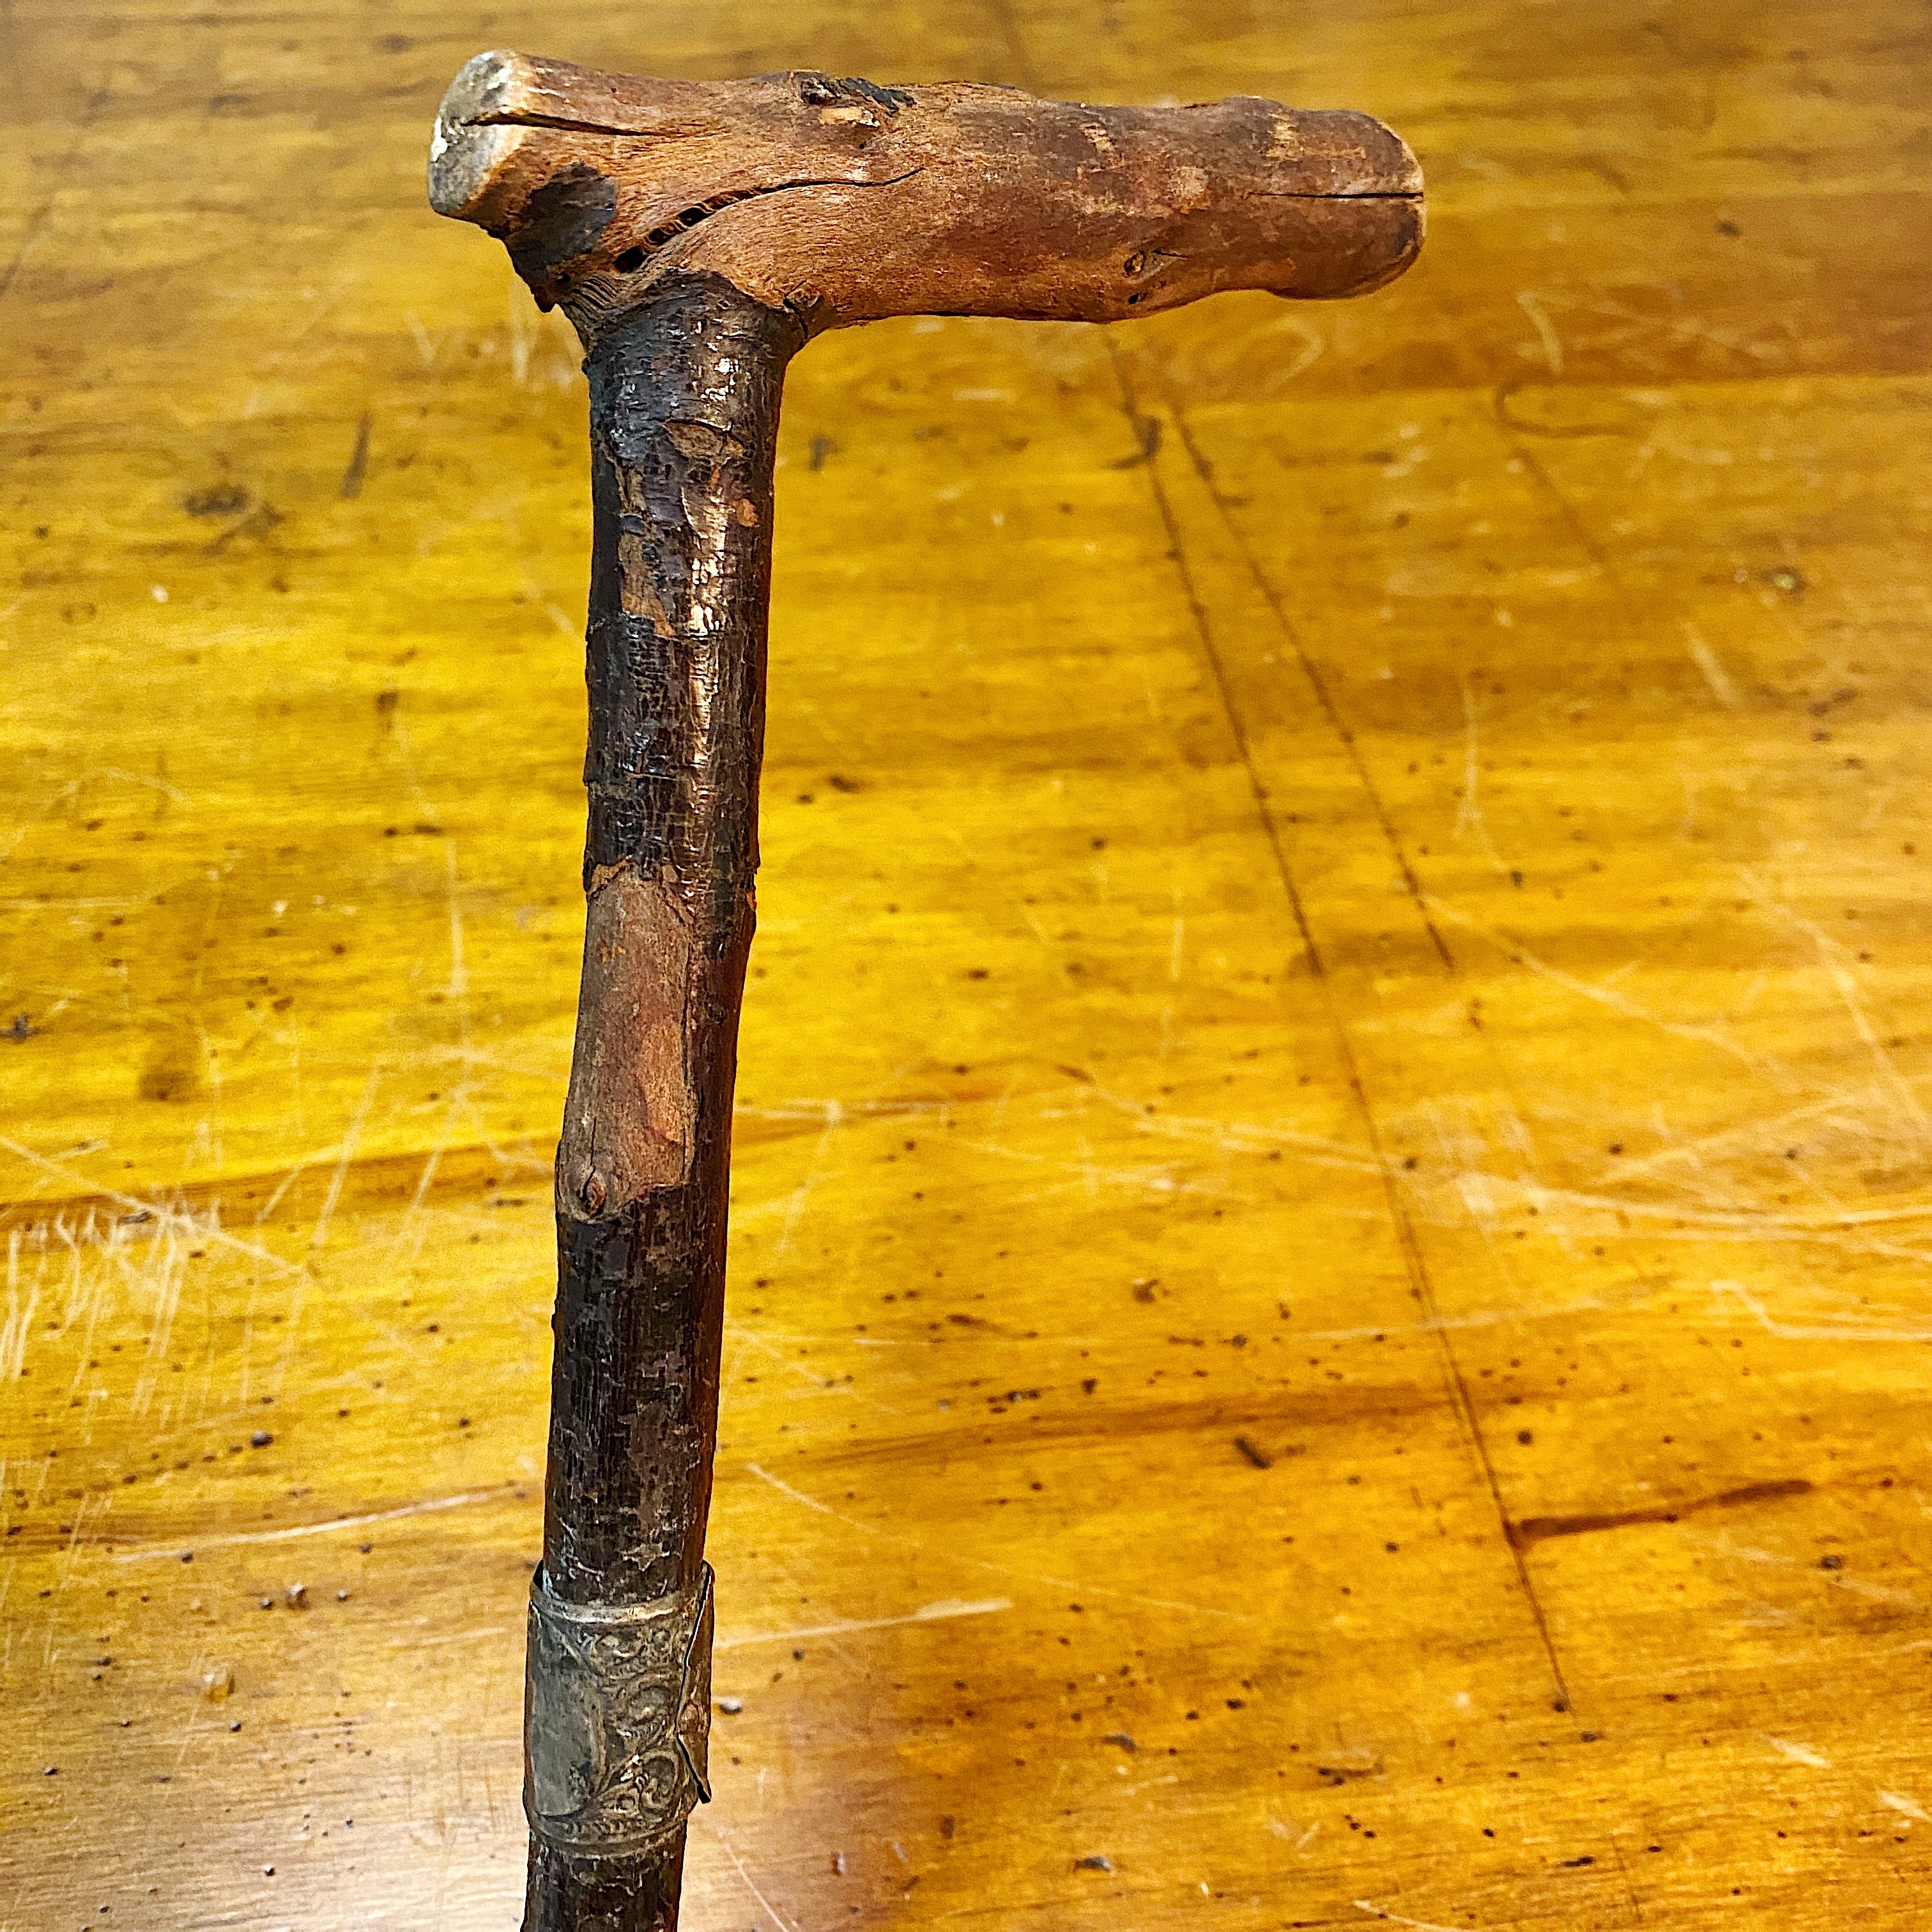 Antique Irish Blackthorn Shillelagh Walking Cane Early 1900s Mad Van Antiques 6518